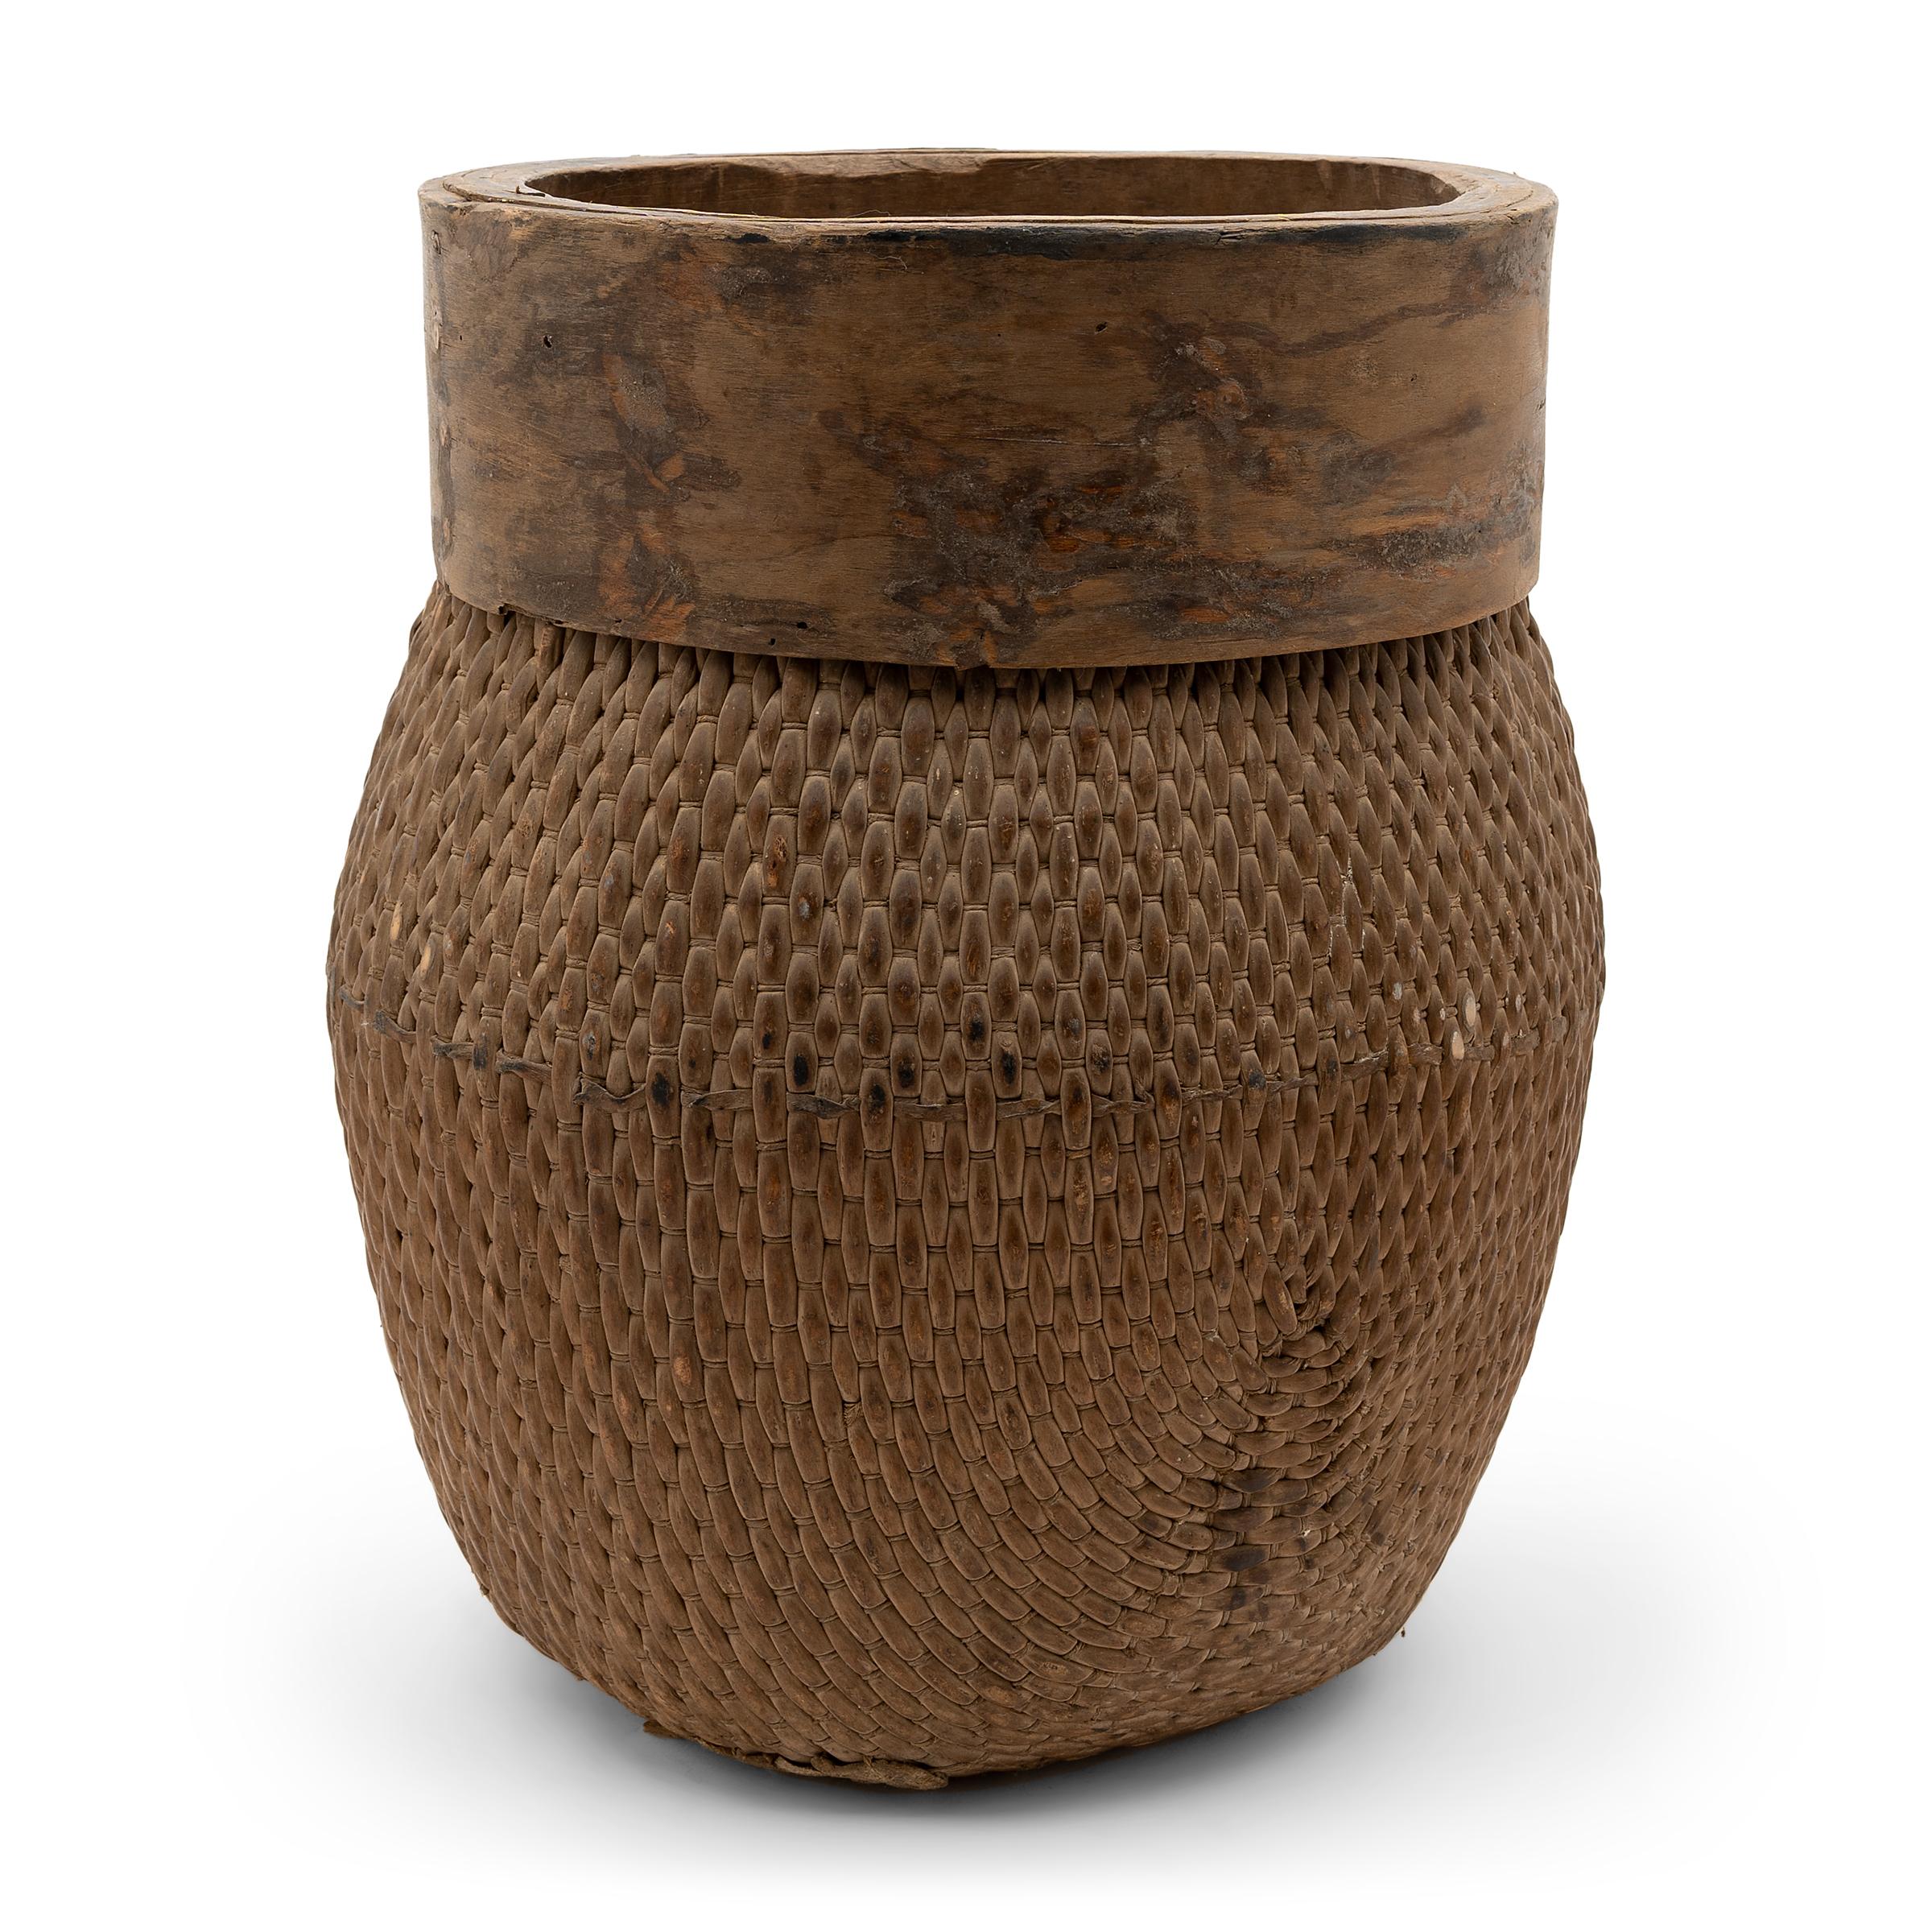 Centuries ago, a woven reed fisherman’s basket such as this would have been common in rural China as an everyday item, used until it became worn through. This particular example remains in beautiful condition, and exists today as a lovely